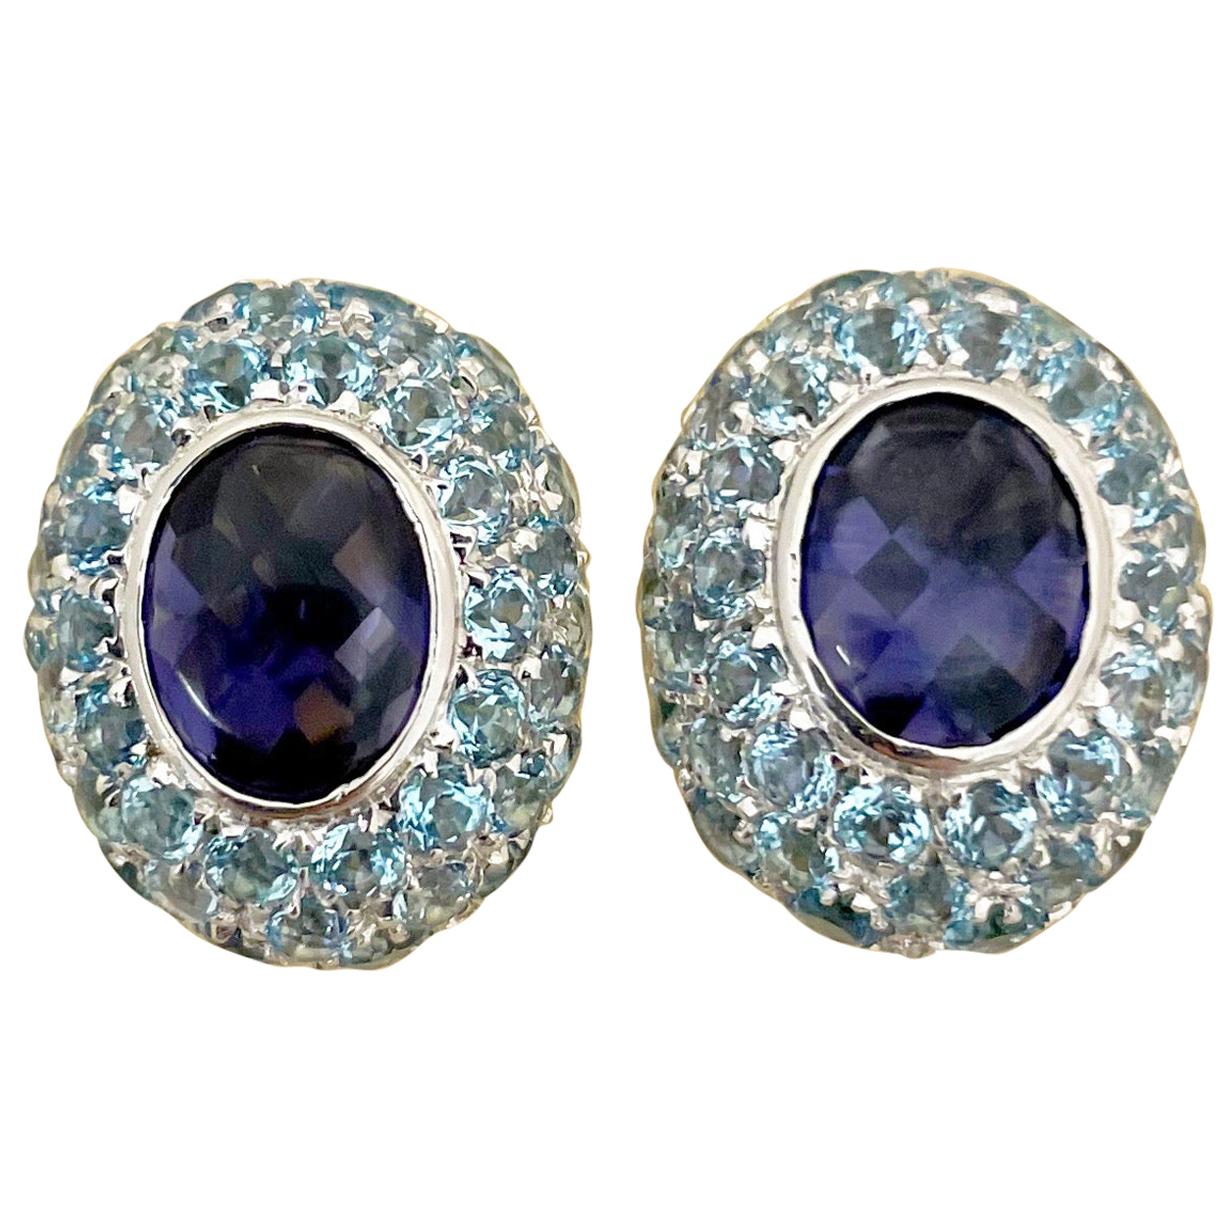 Vaid Roma 18 Karat White Gold Earrings with Iolite and Blue Topaz